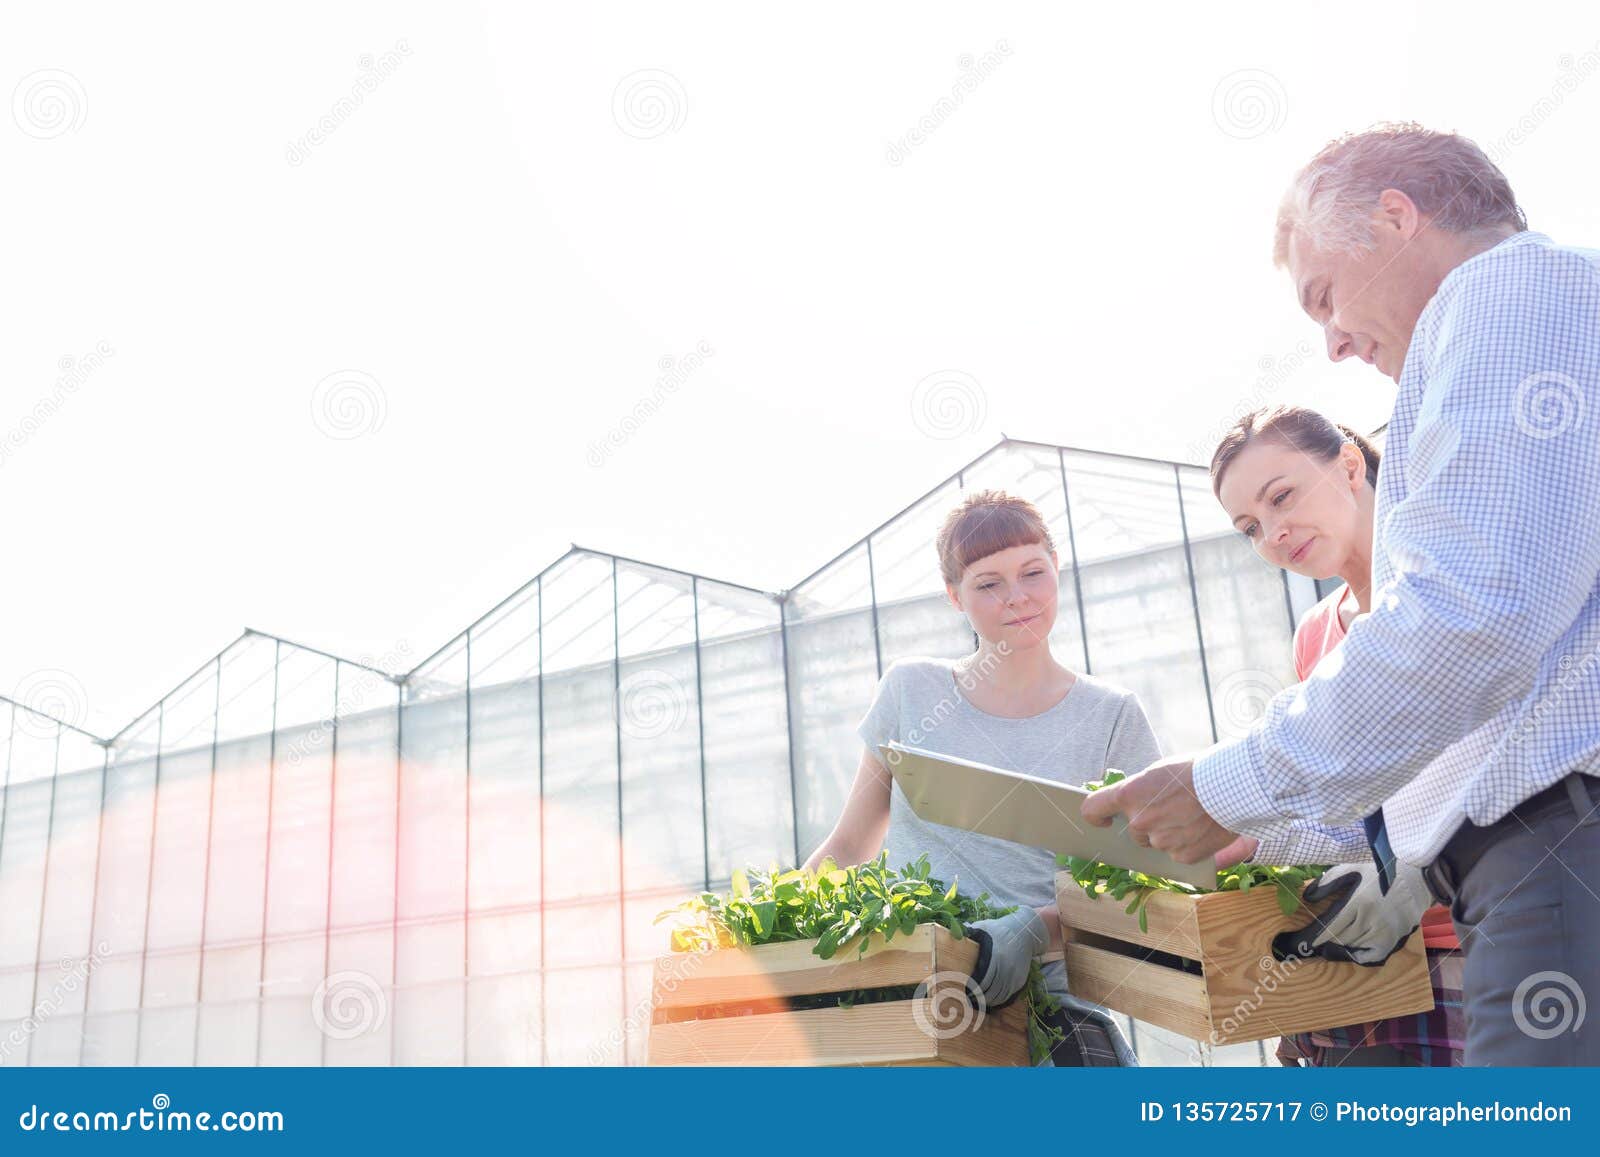 mature male biochemist discussing with female botanists against clear sky